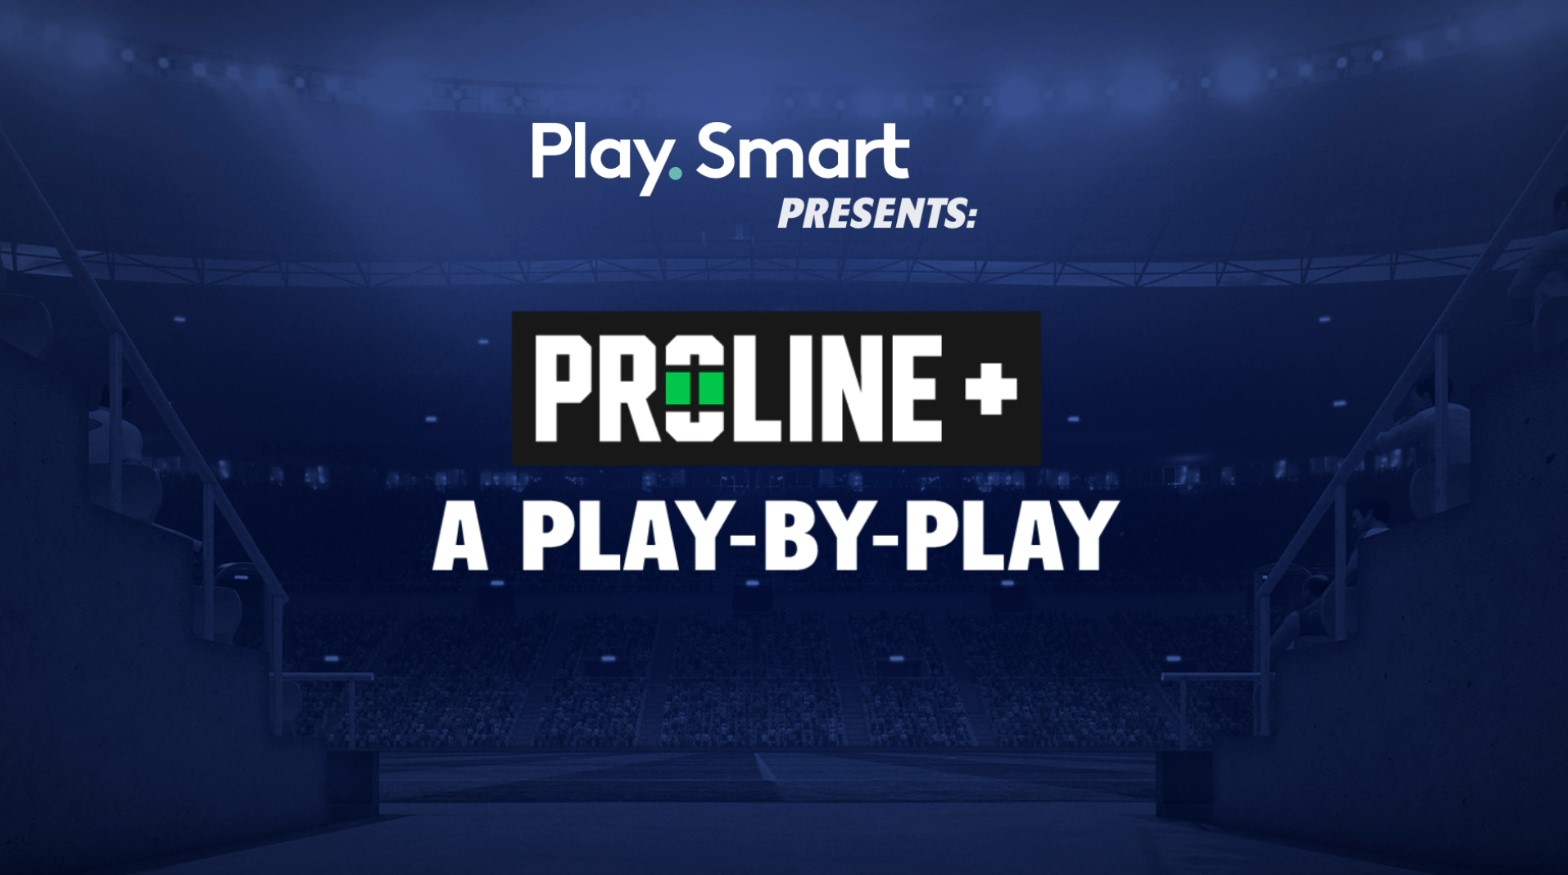 Proline+: A Play-by-Play